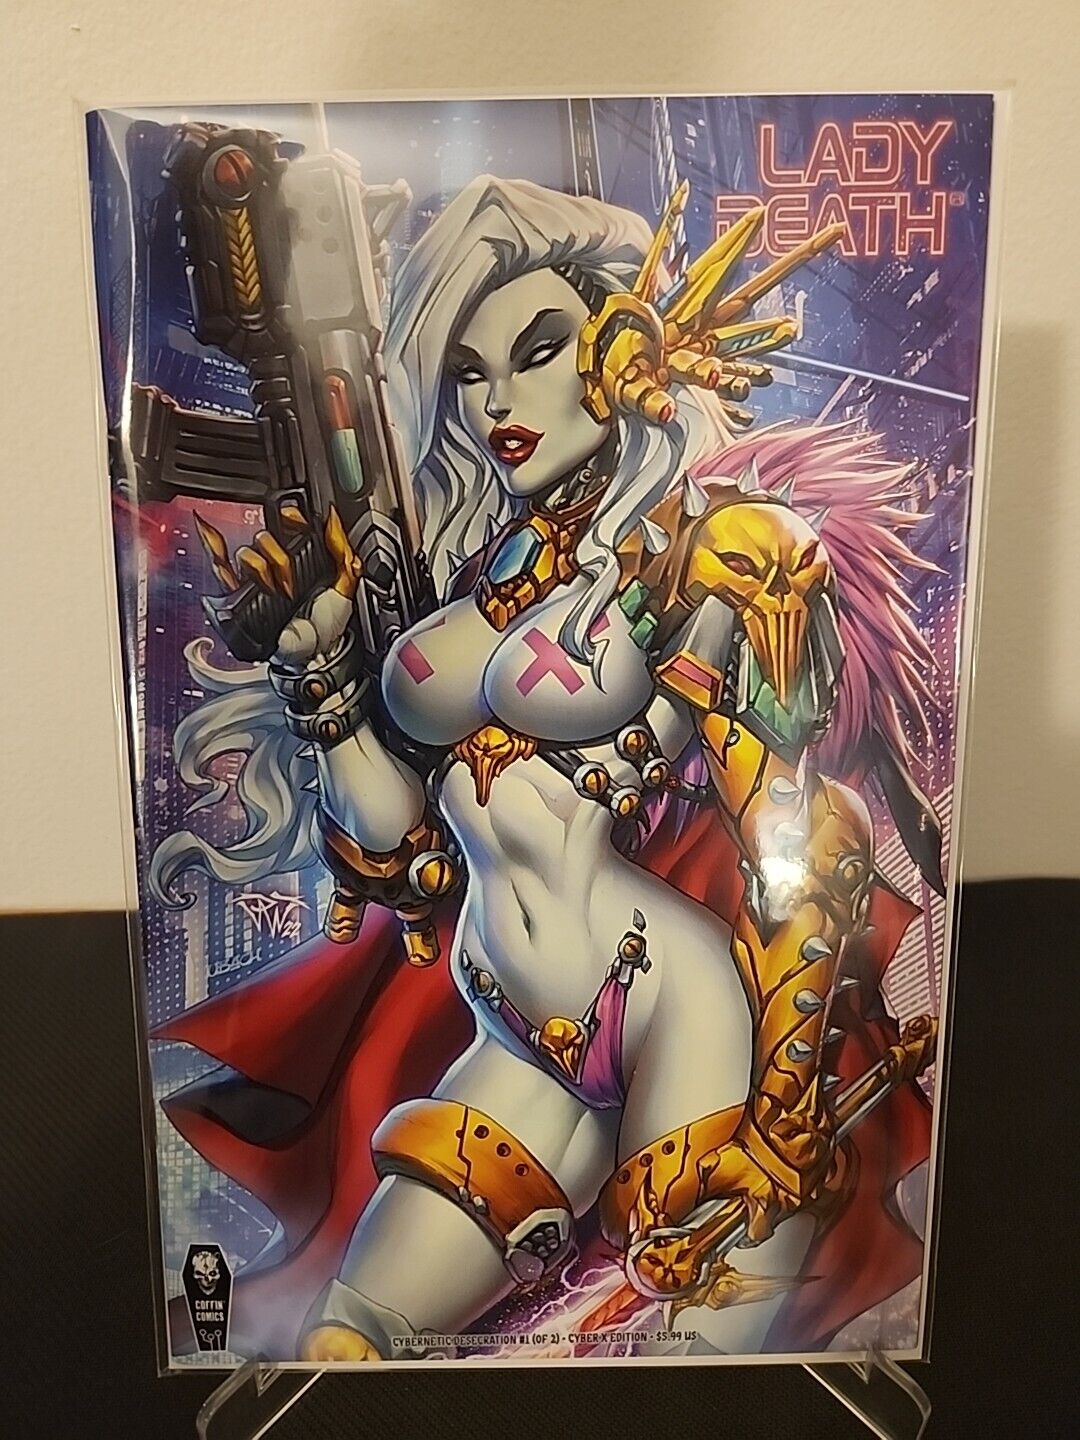 Lady Death: Cybernetic Desecration #1 (of 2) Cyber X Edition